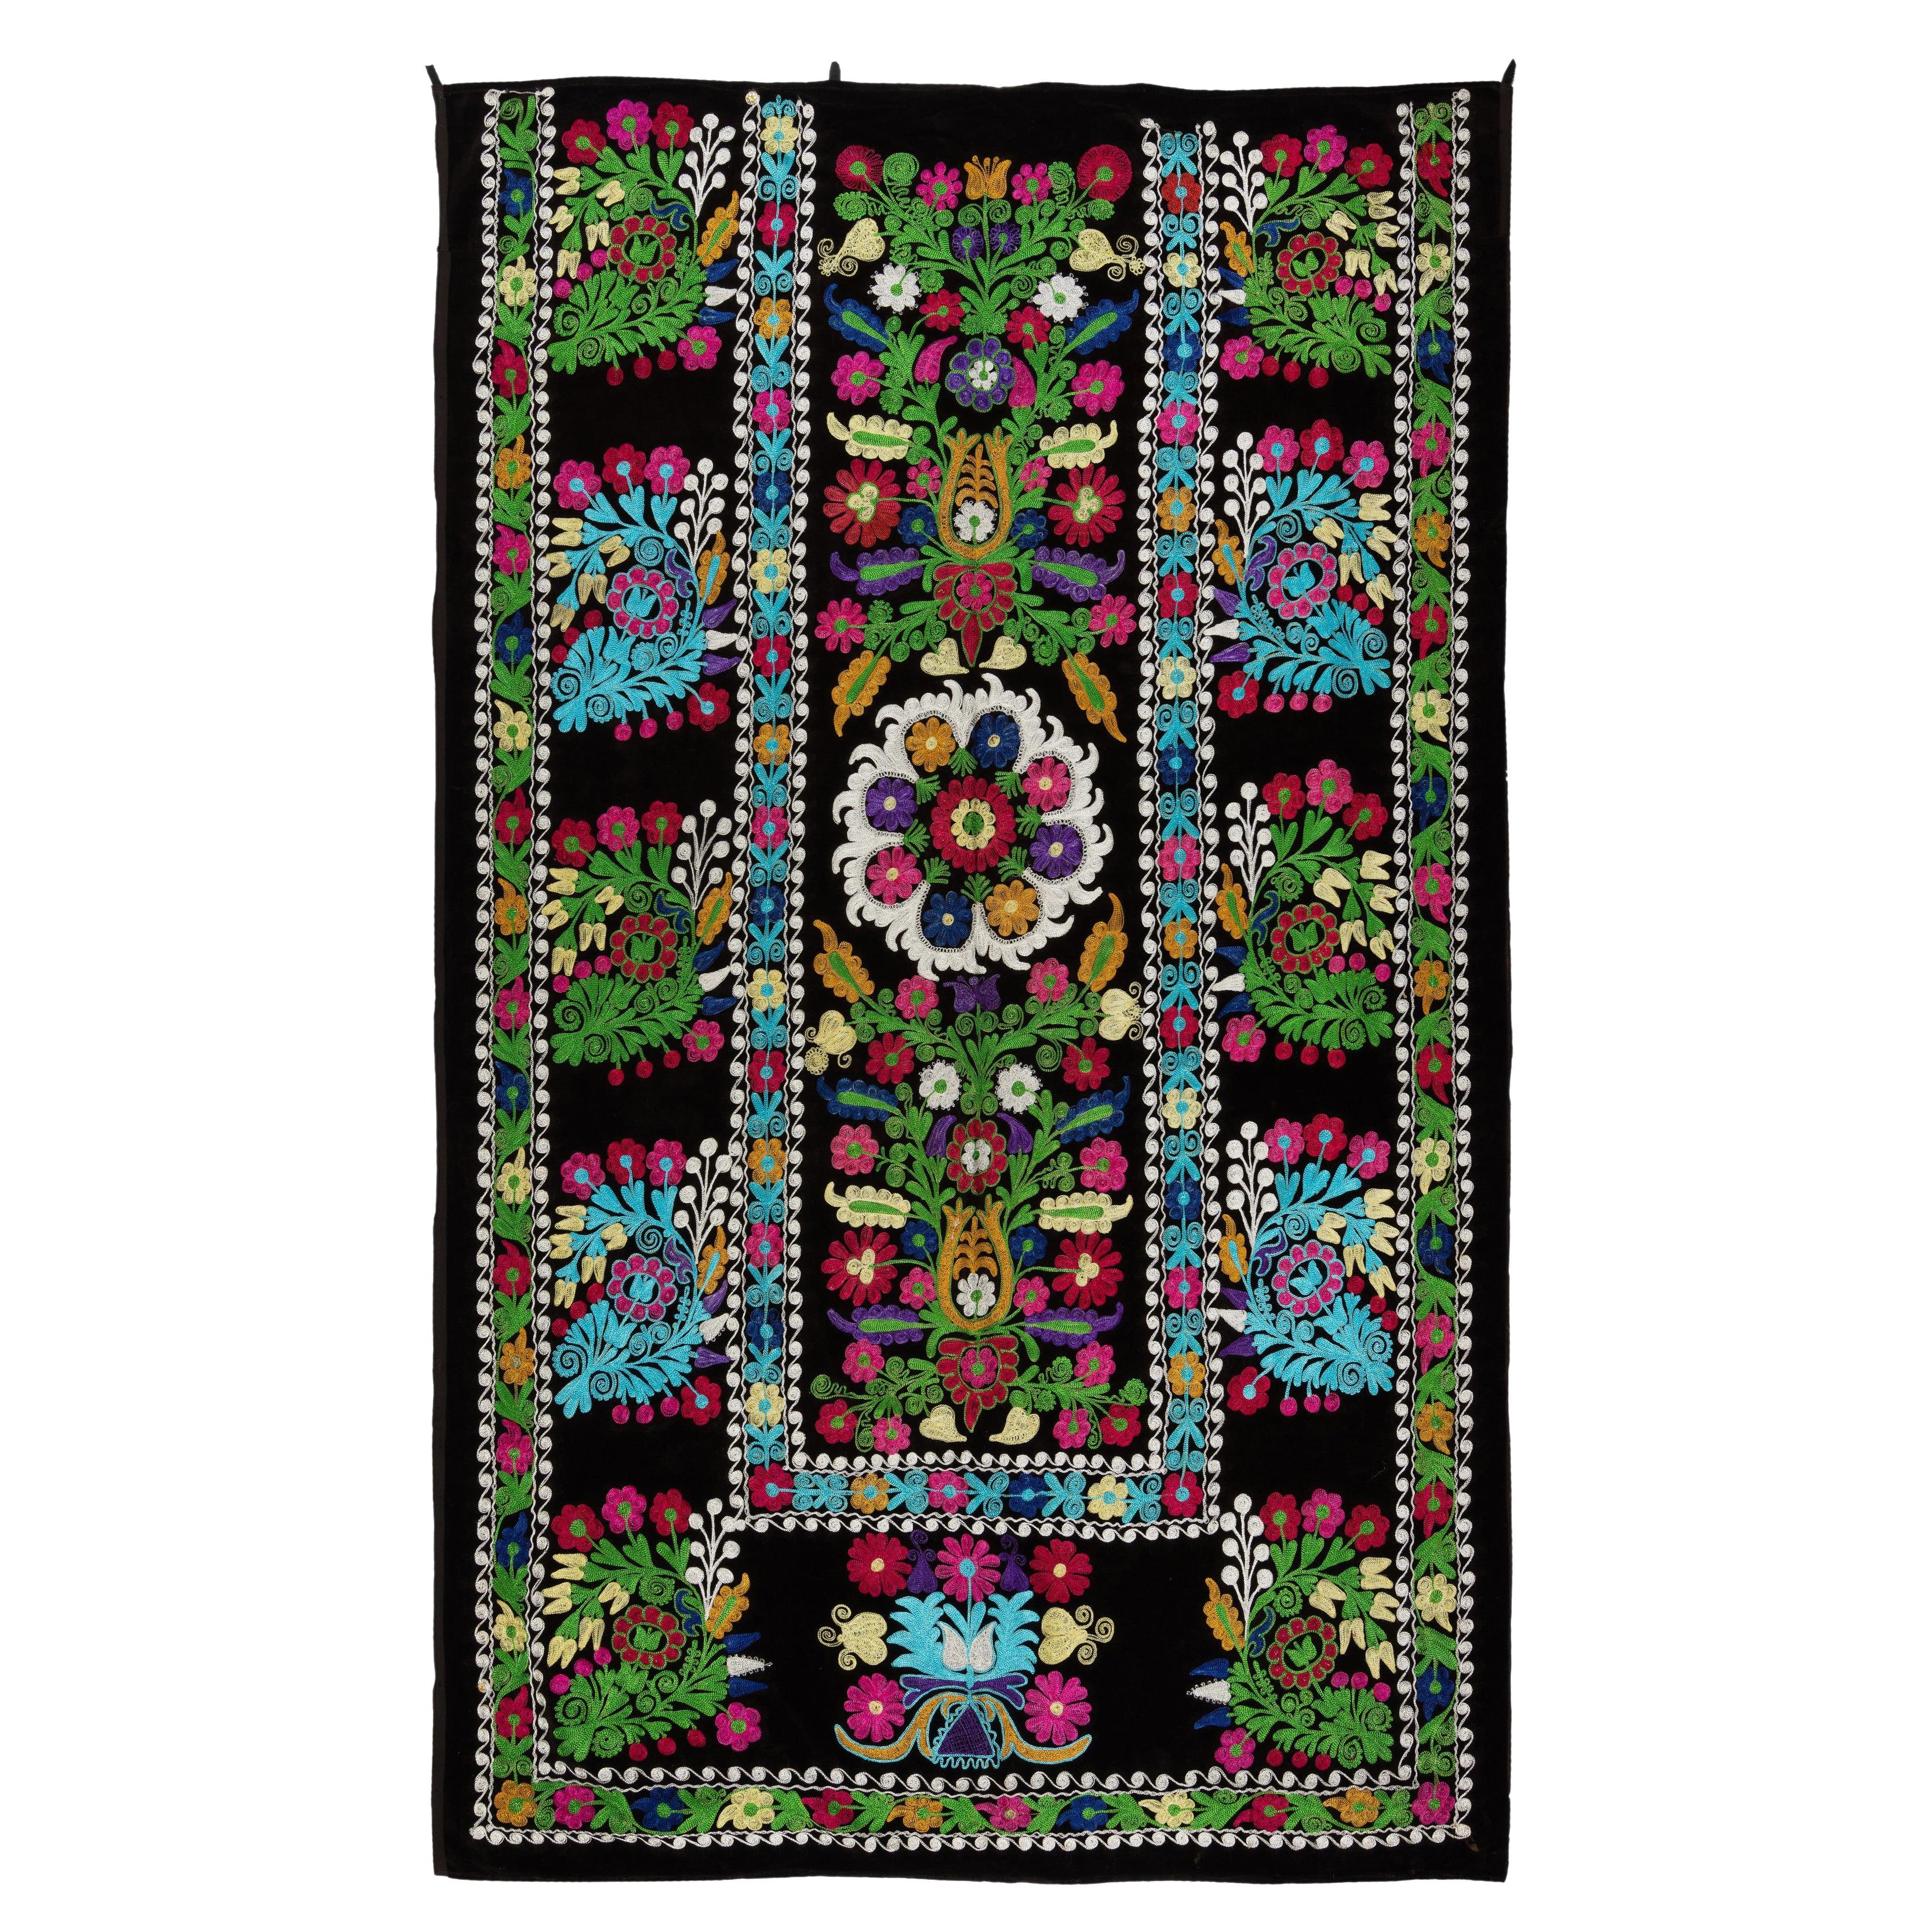 4.6x7.5 Ft Gorgeous Silk Embroidery Suzani Wall Hanging, Needlework Table Cover